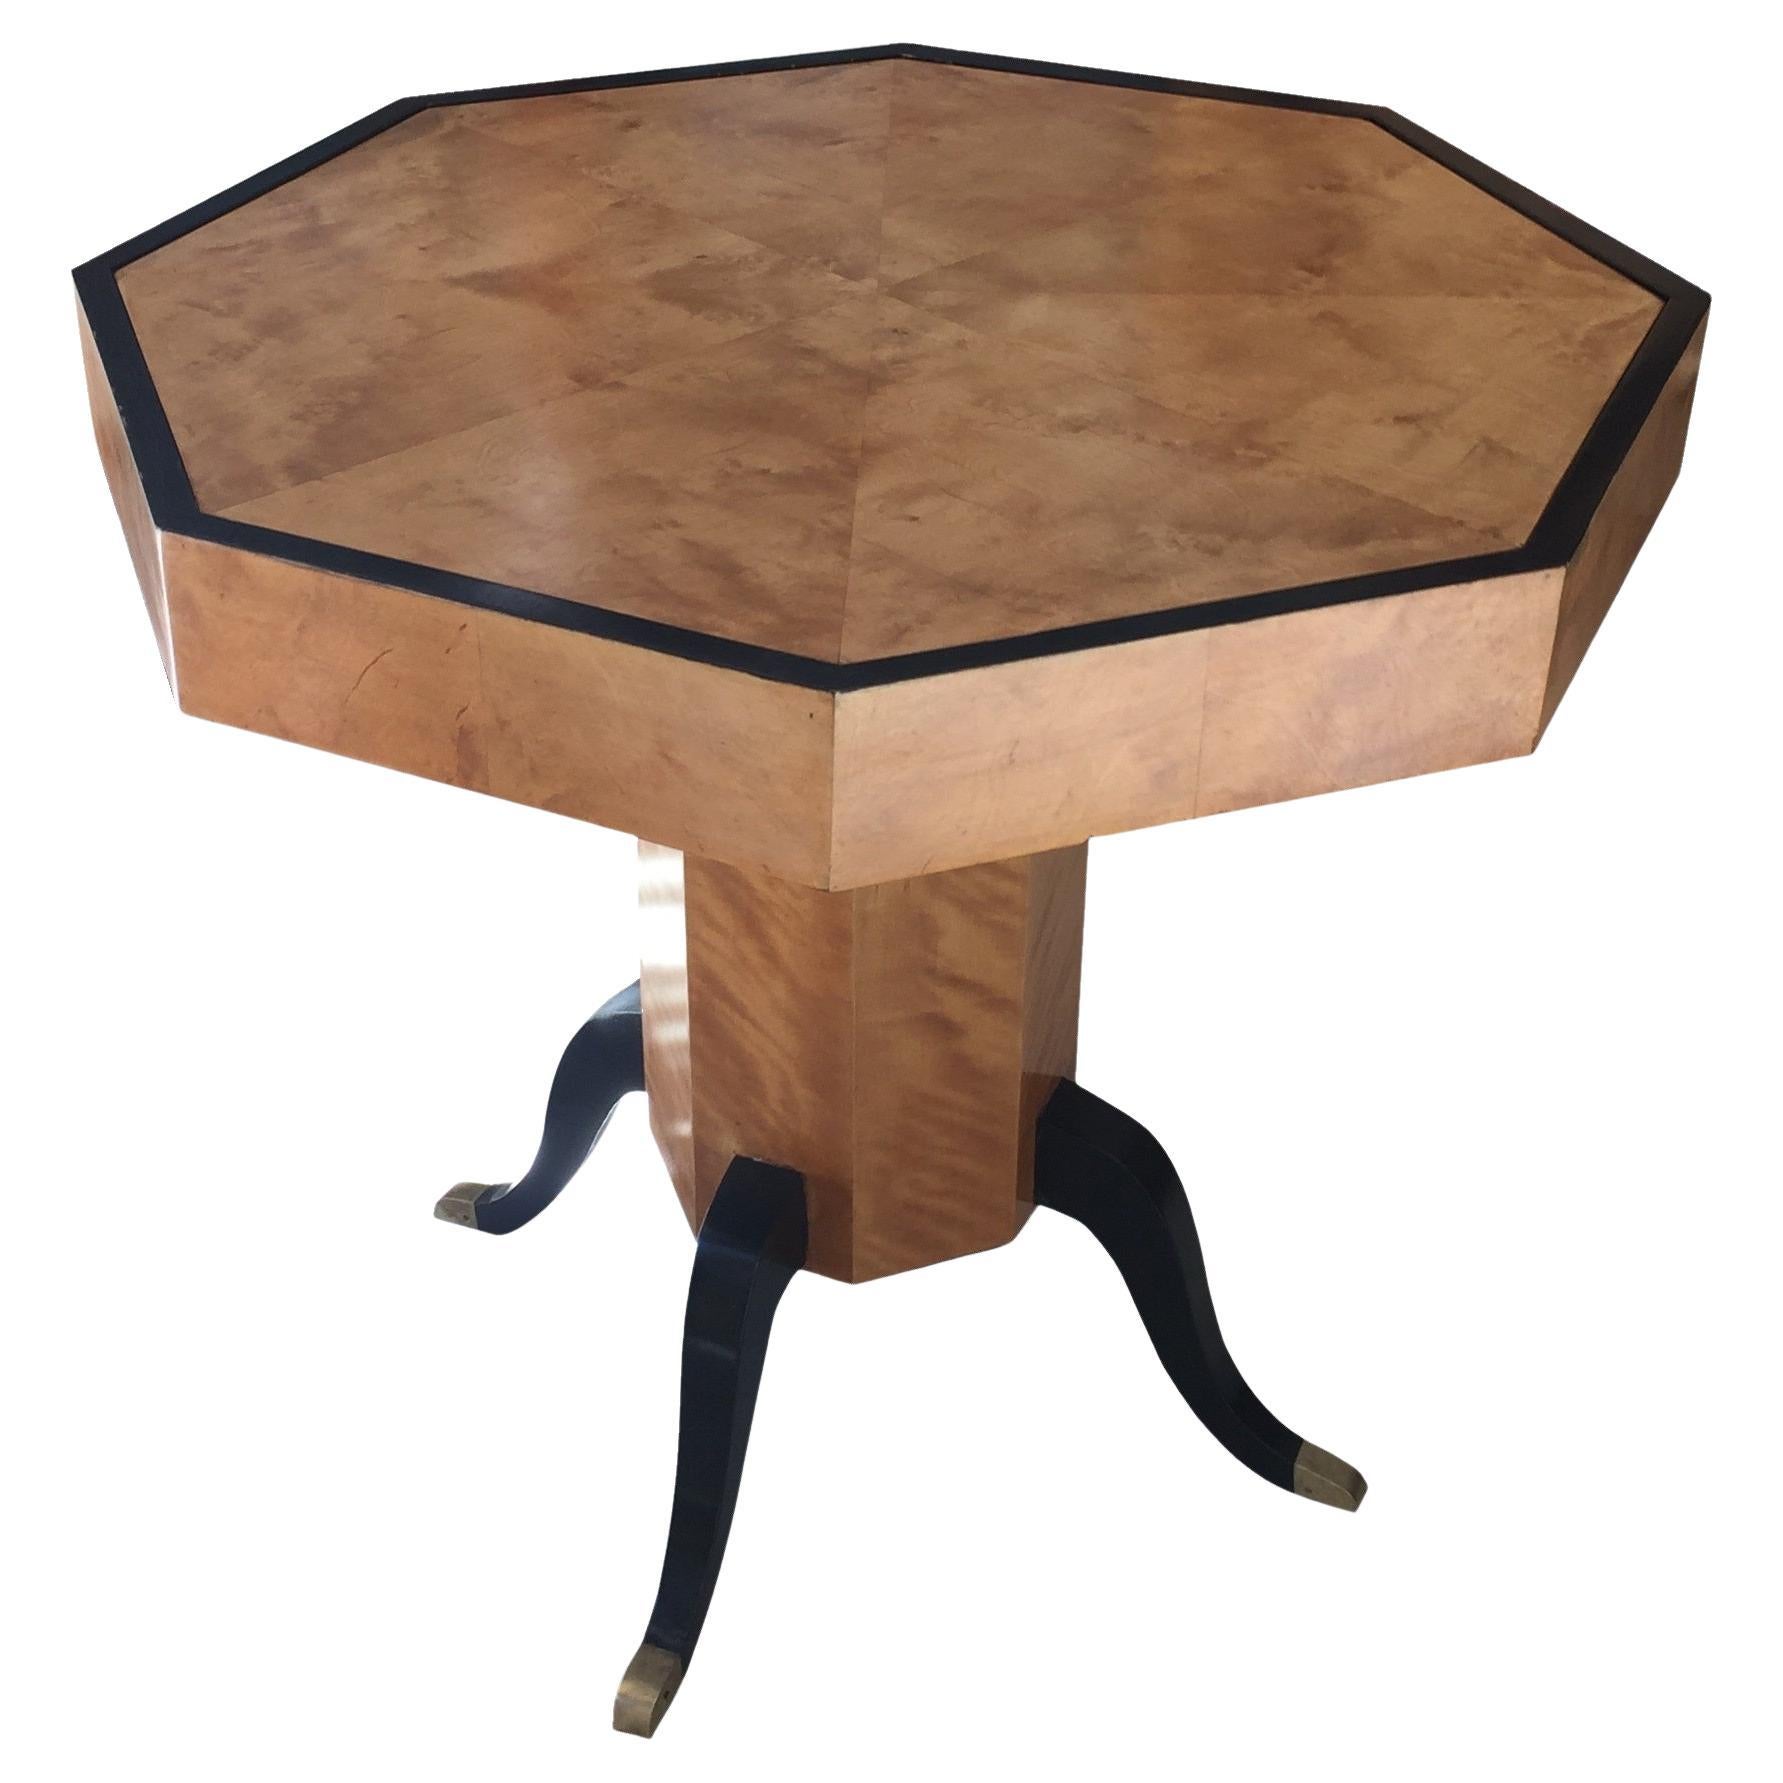 Table, Style: Art Deco, ' 4 People', Year: 1920, Wood and Bronze